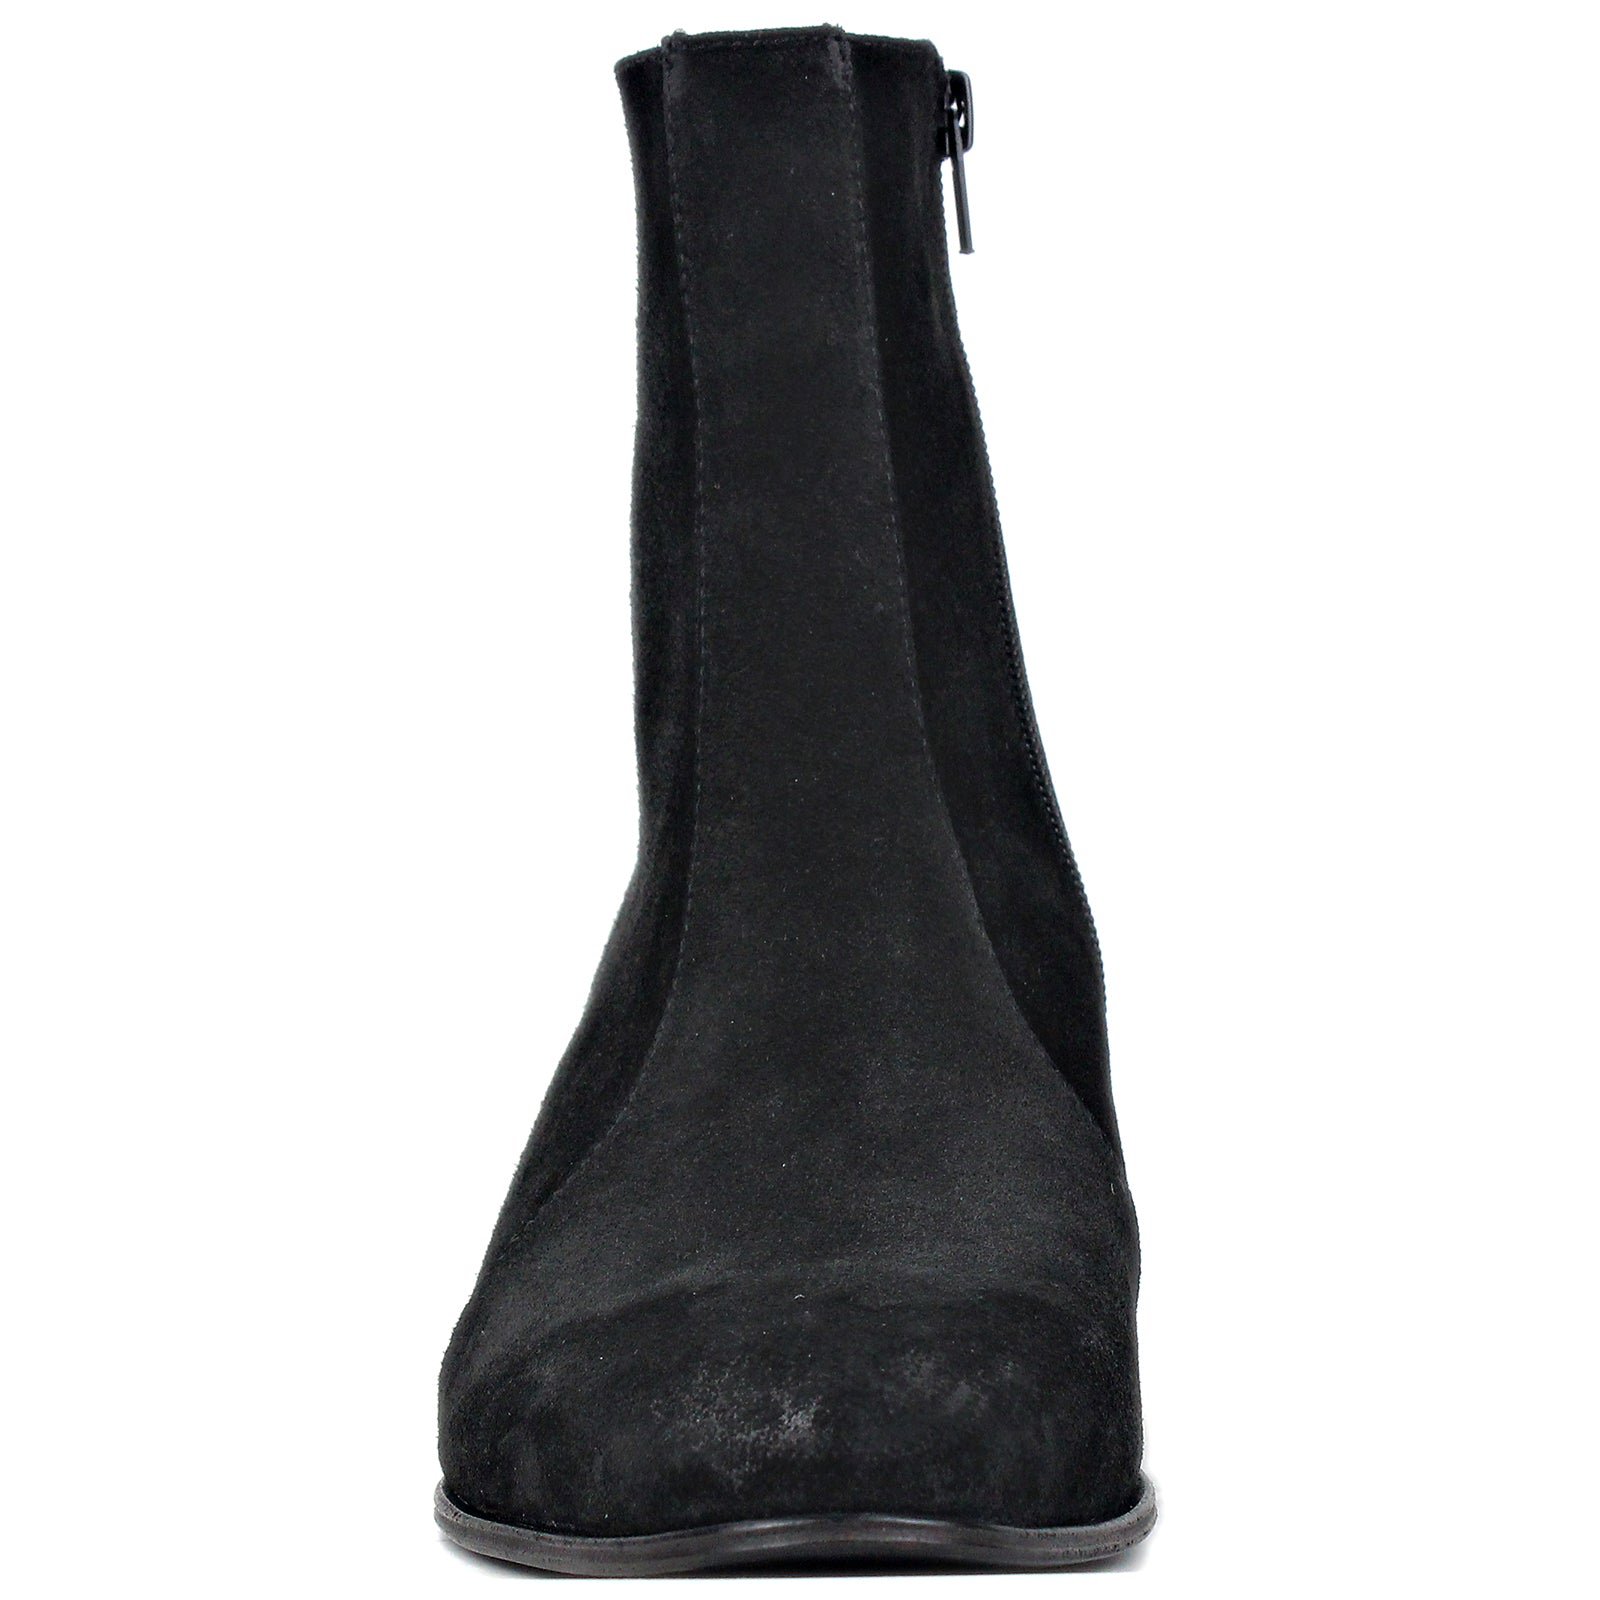 Wiipop Genuine Leather Horse Hair Boots